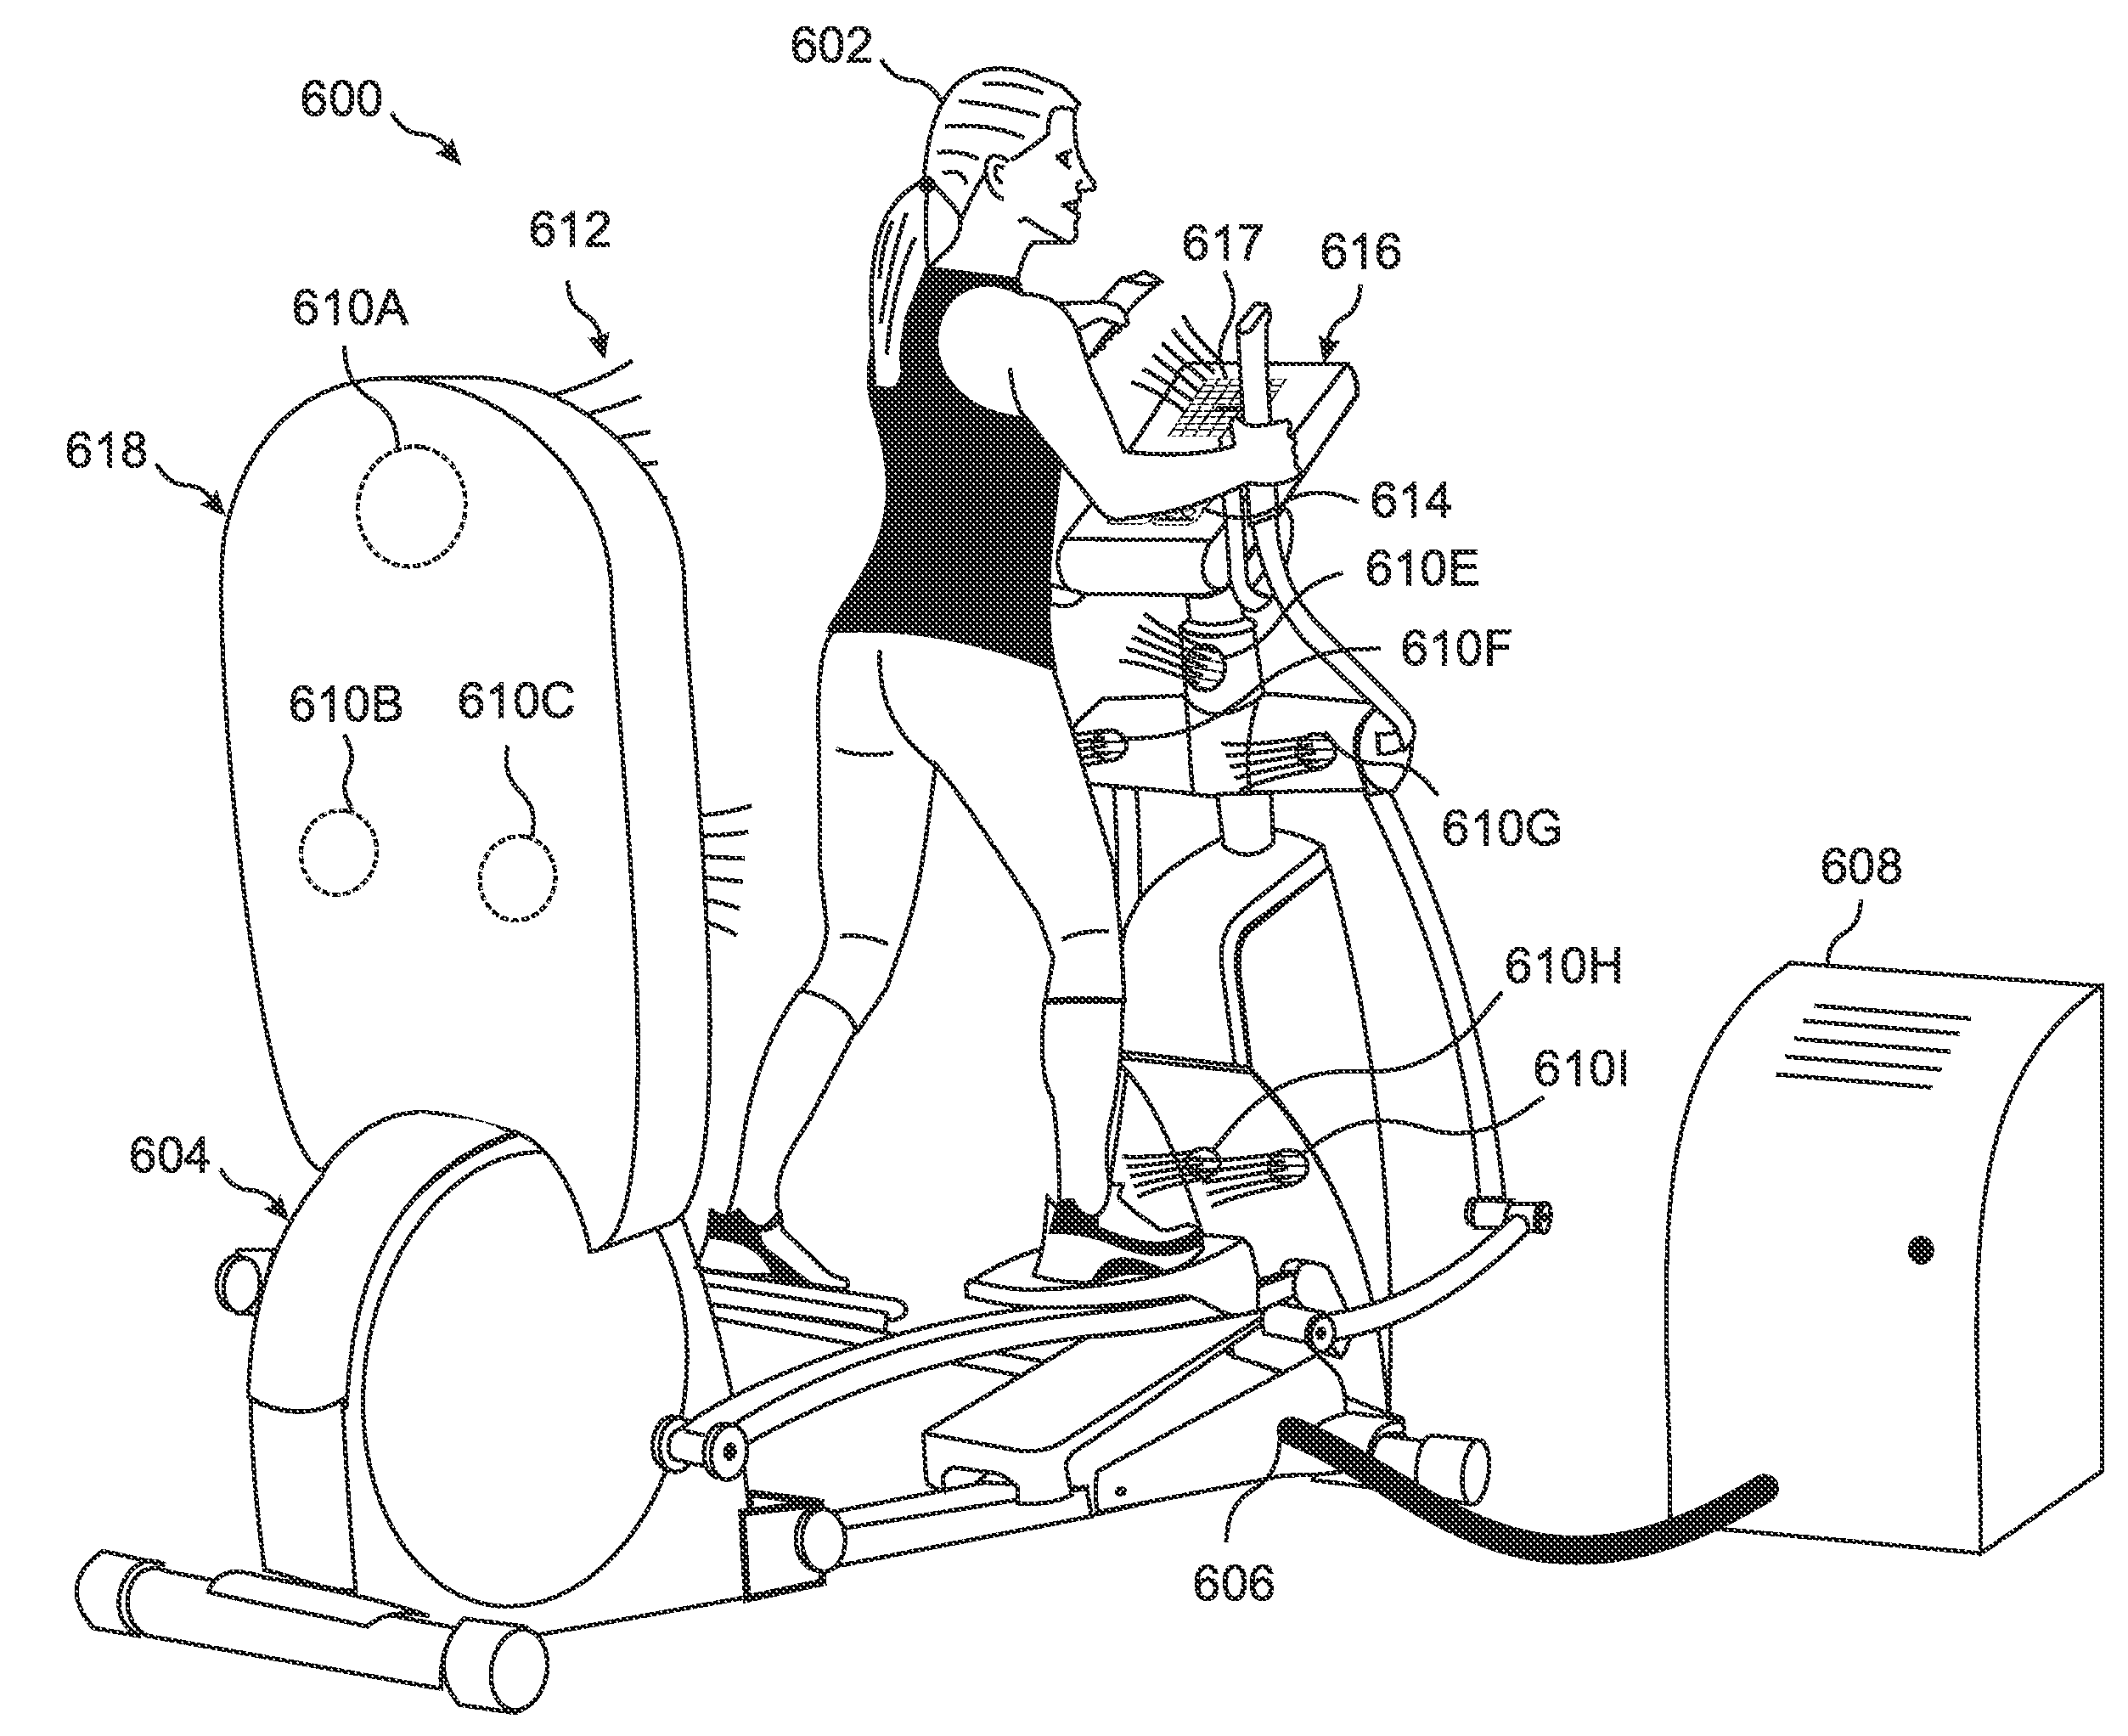 Apparatus for cooling an exerciser having convenient centralized control of air outlets built into a stationary exercise device